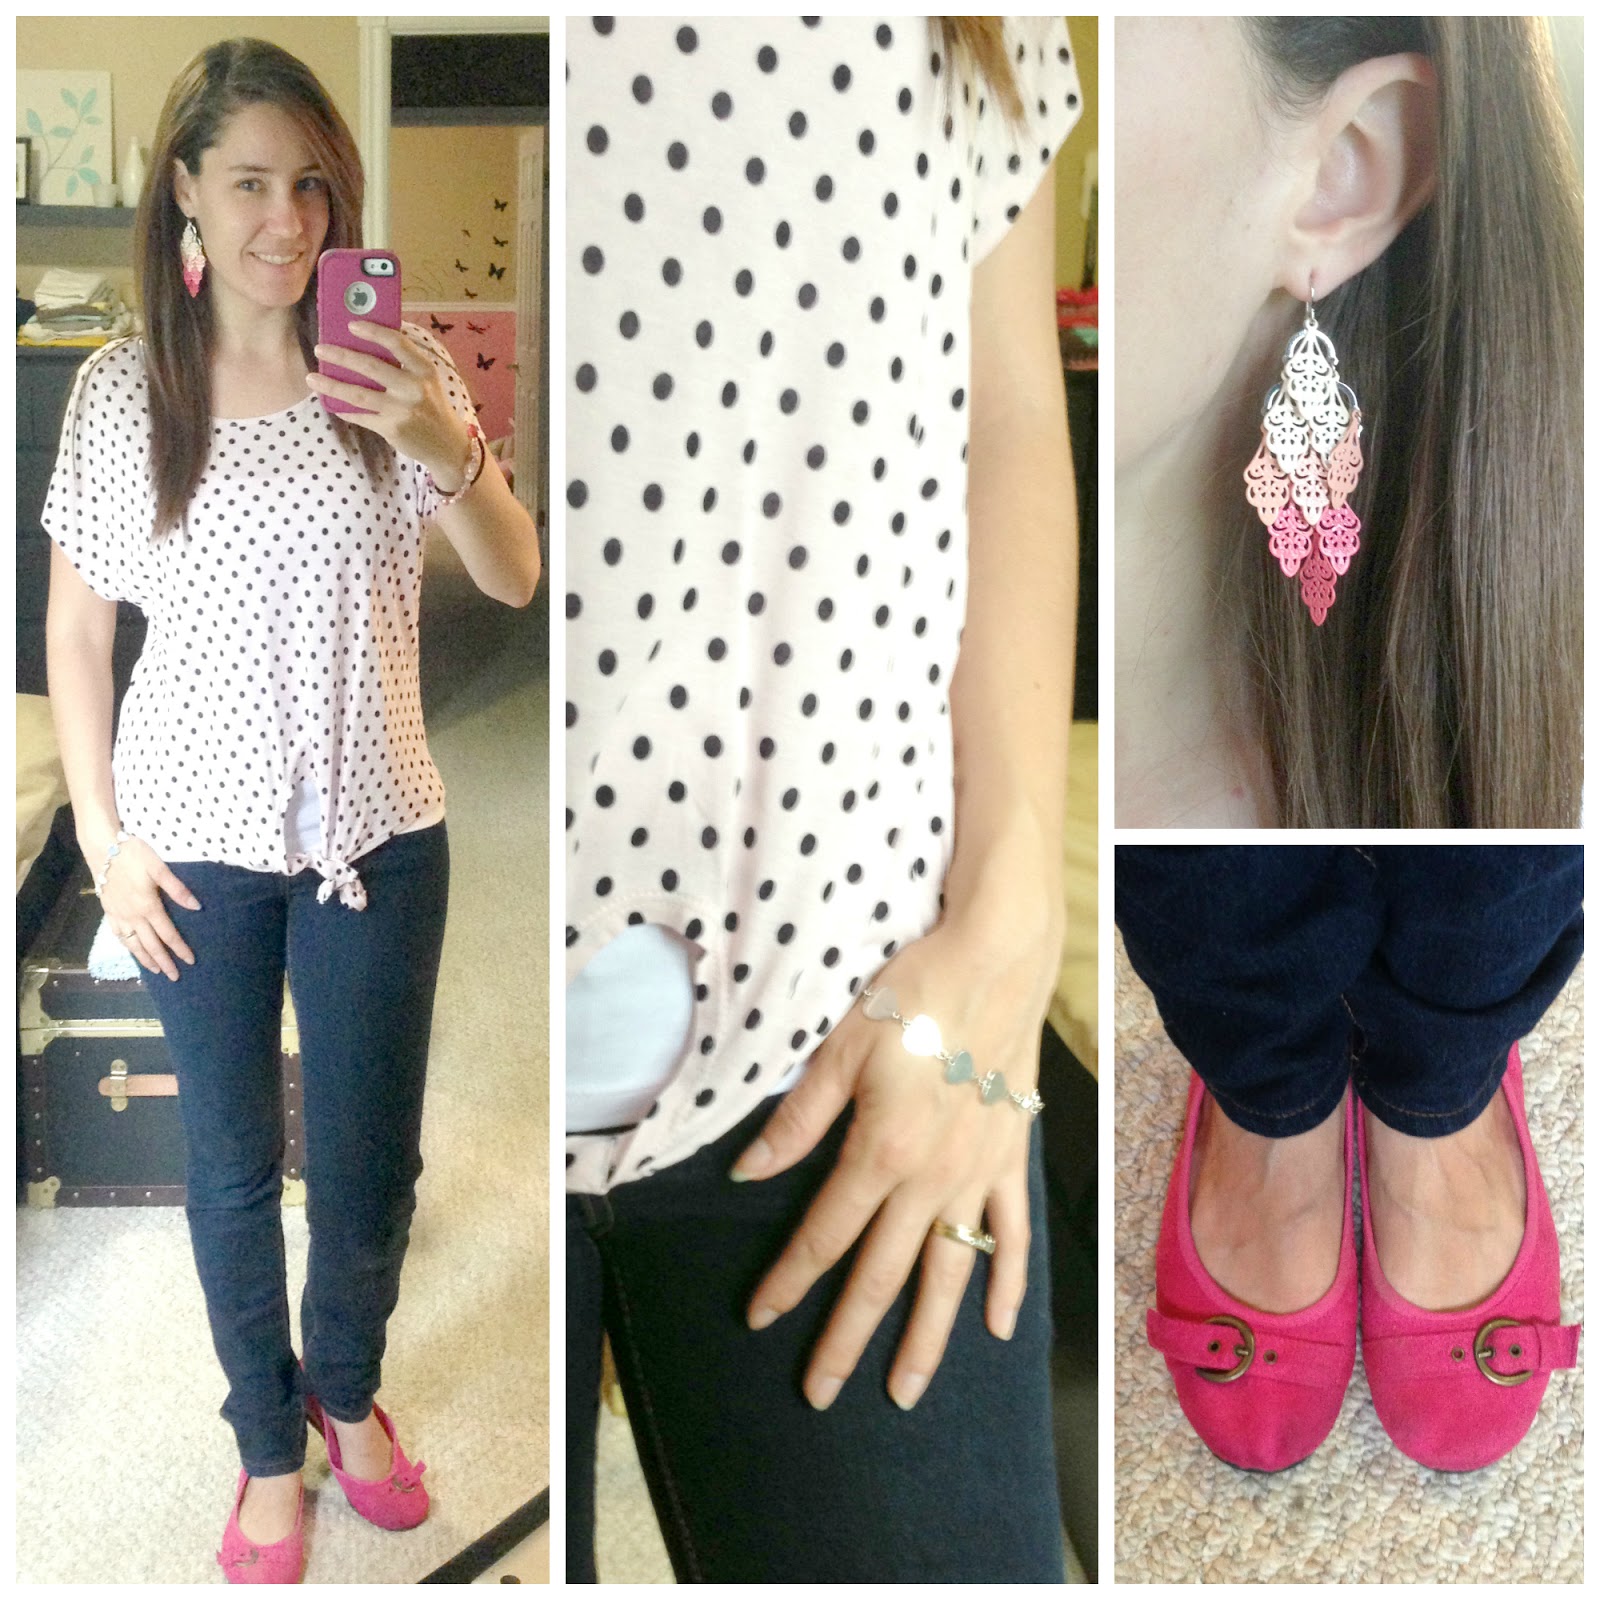 Light pink polka dot t-shirt & skinny jeans. Cute look for summer.